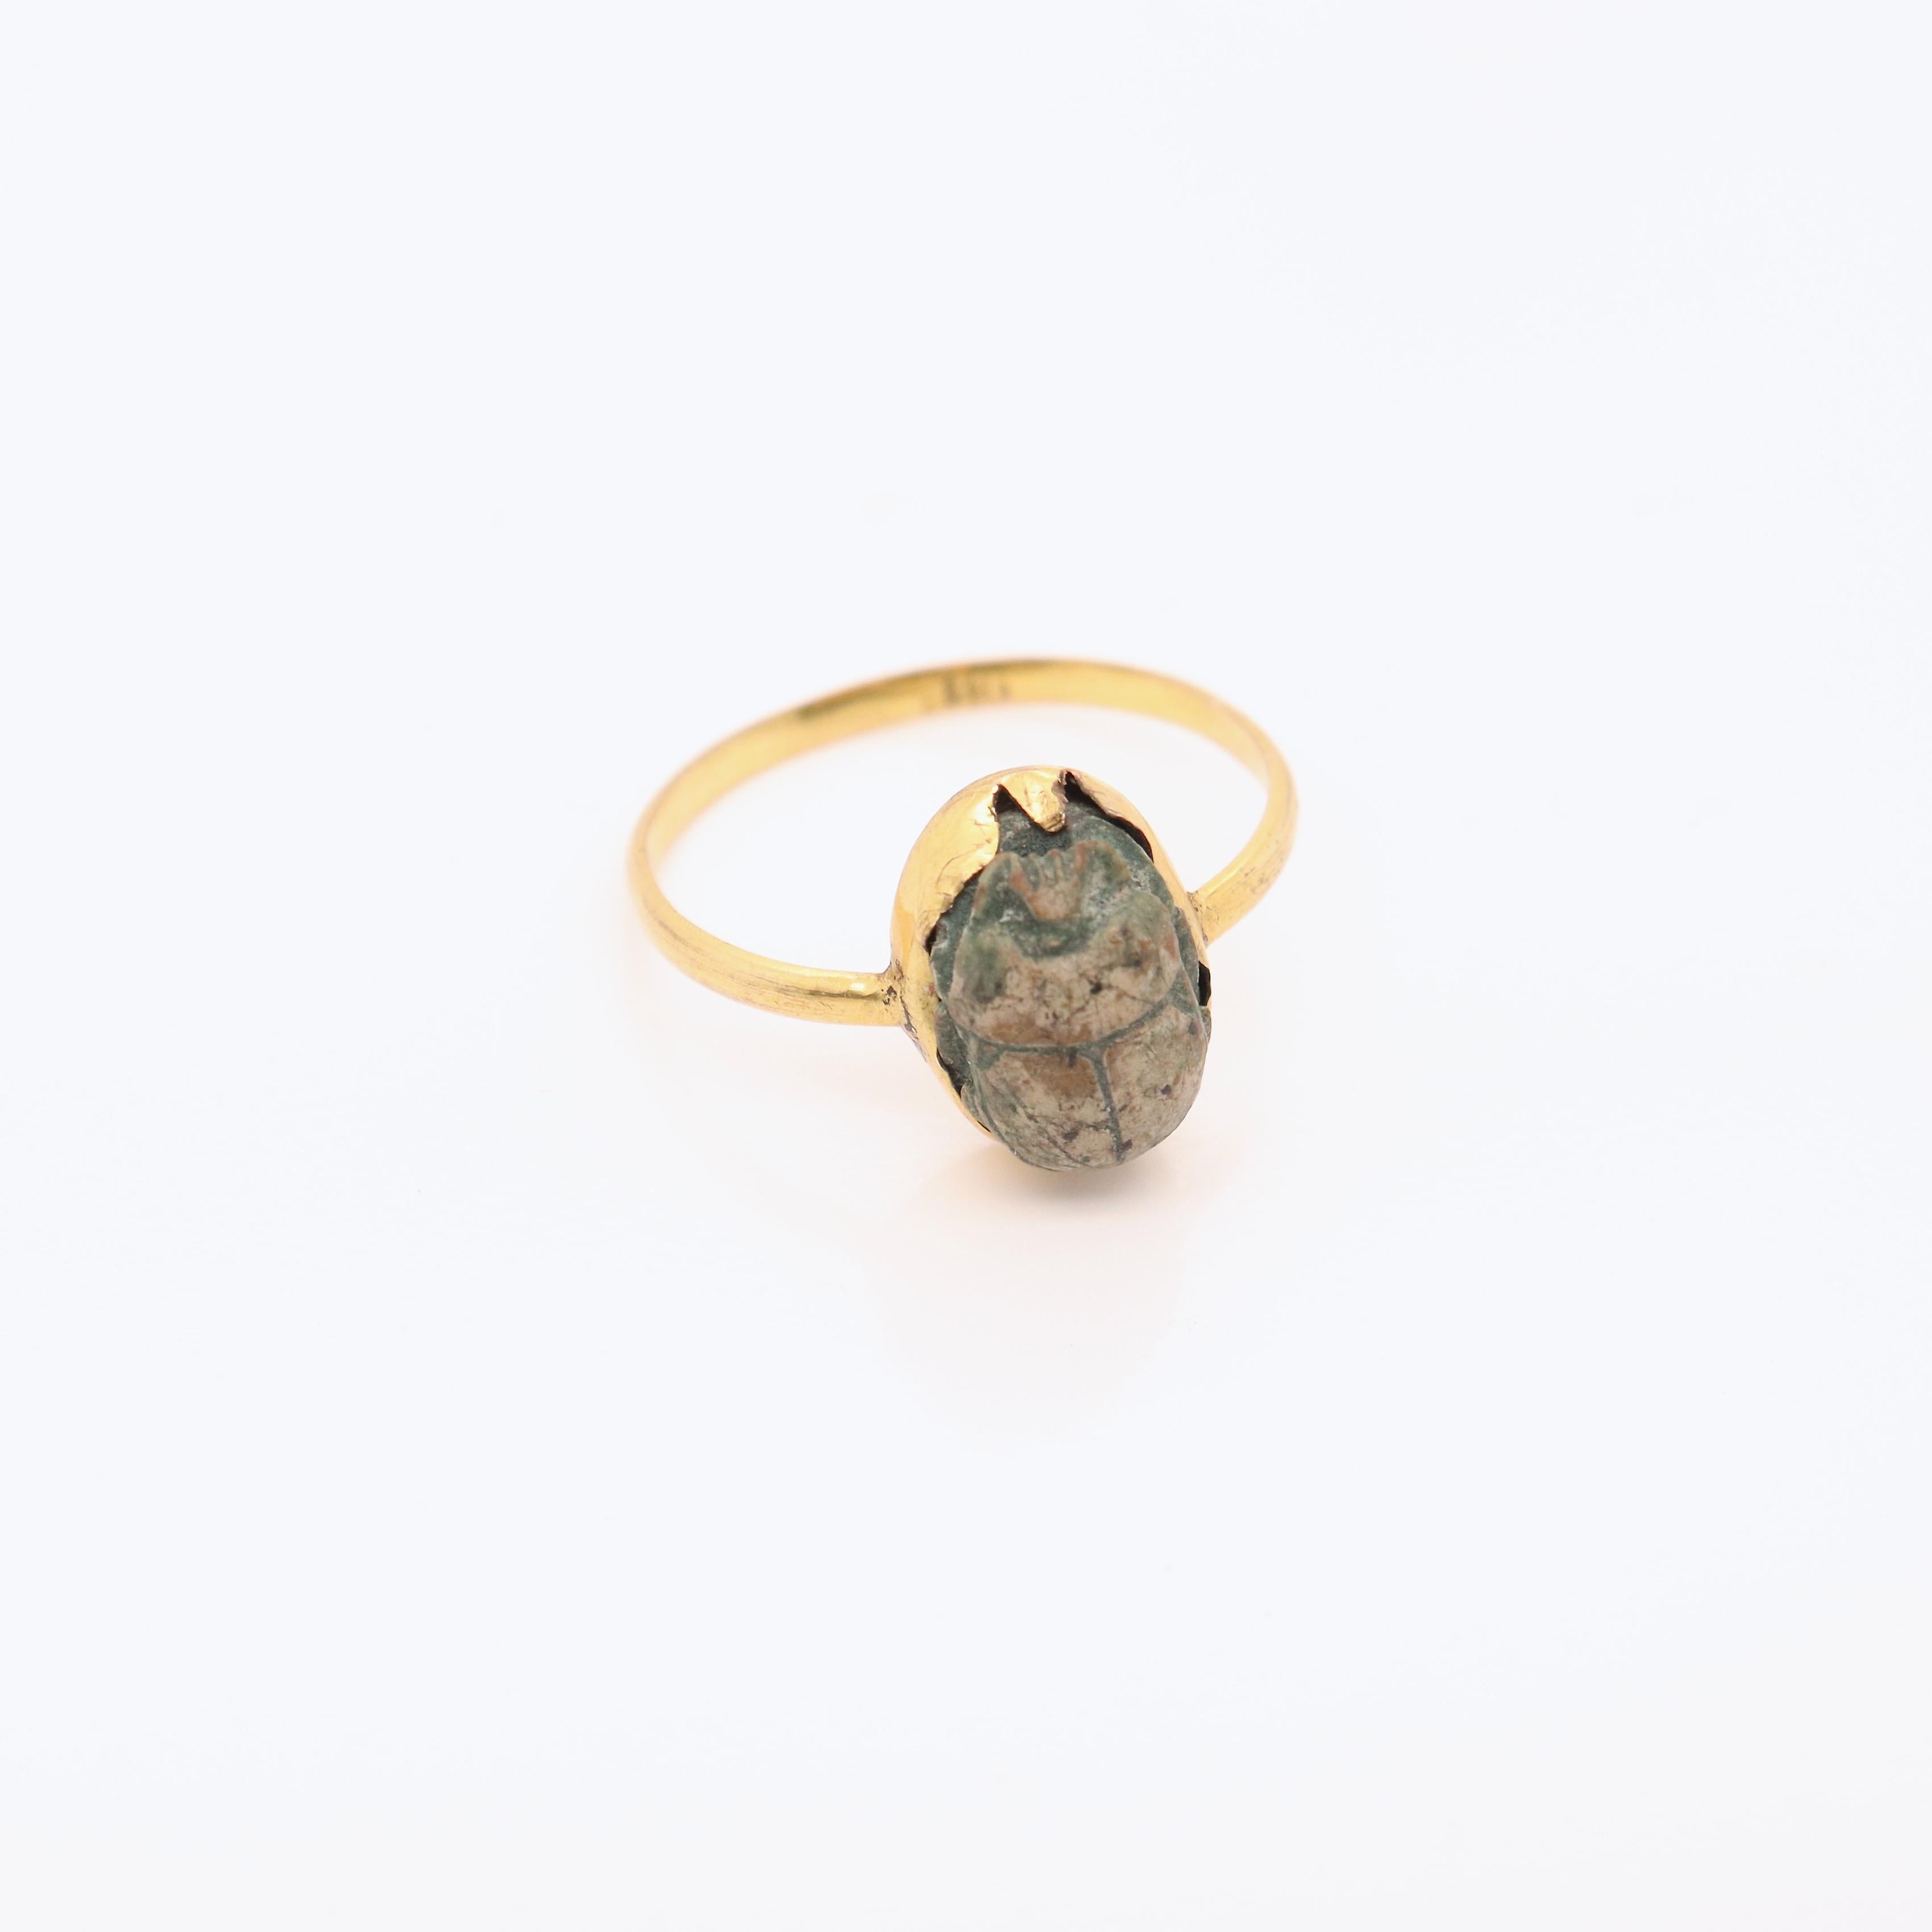 A fine antique Egyptian gold & faience pottery ring.

With an old tag attached identifying the scarab as ancient.

Set in a rudimentary bezel setting and mounted on a gold band that tests at 10k.

Simply a wonderful piece of antique